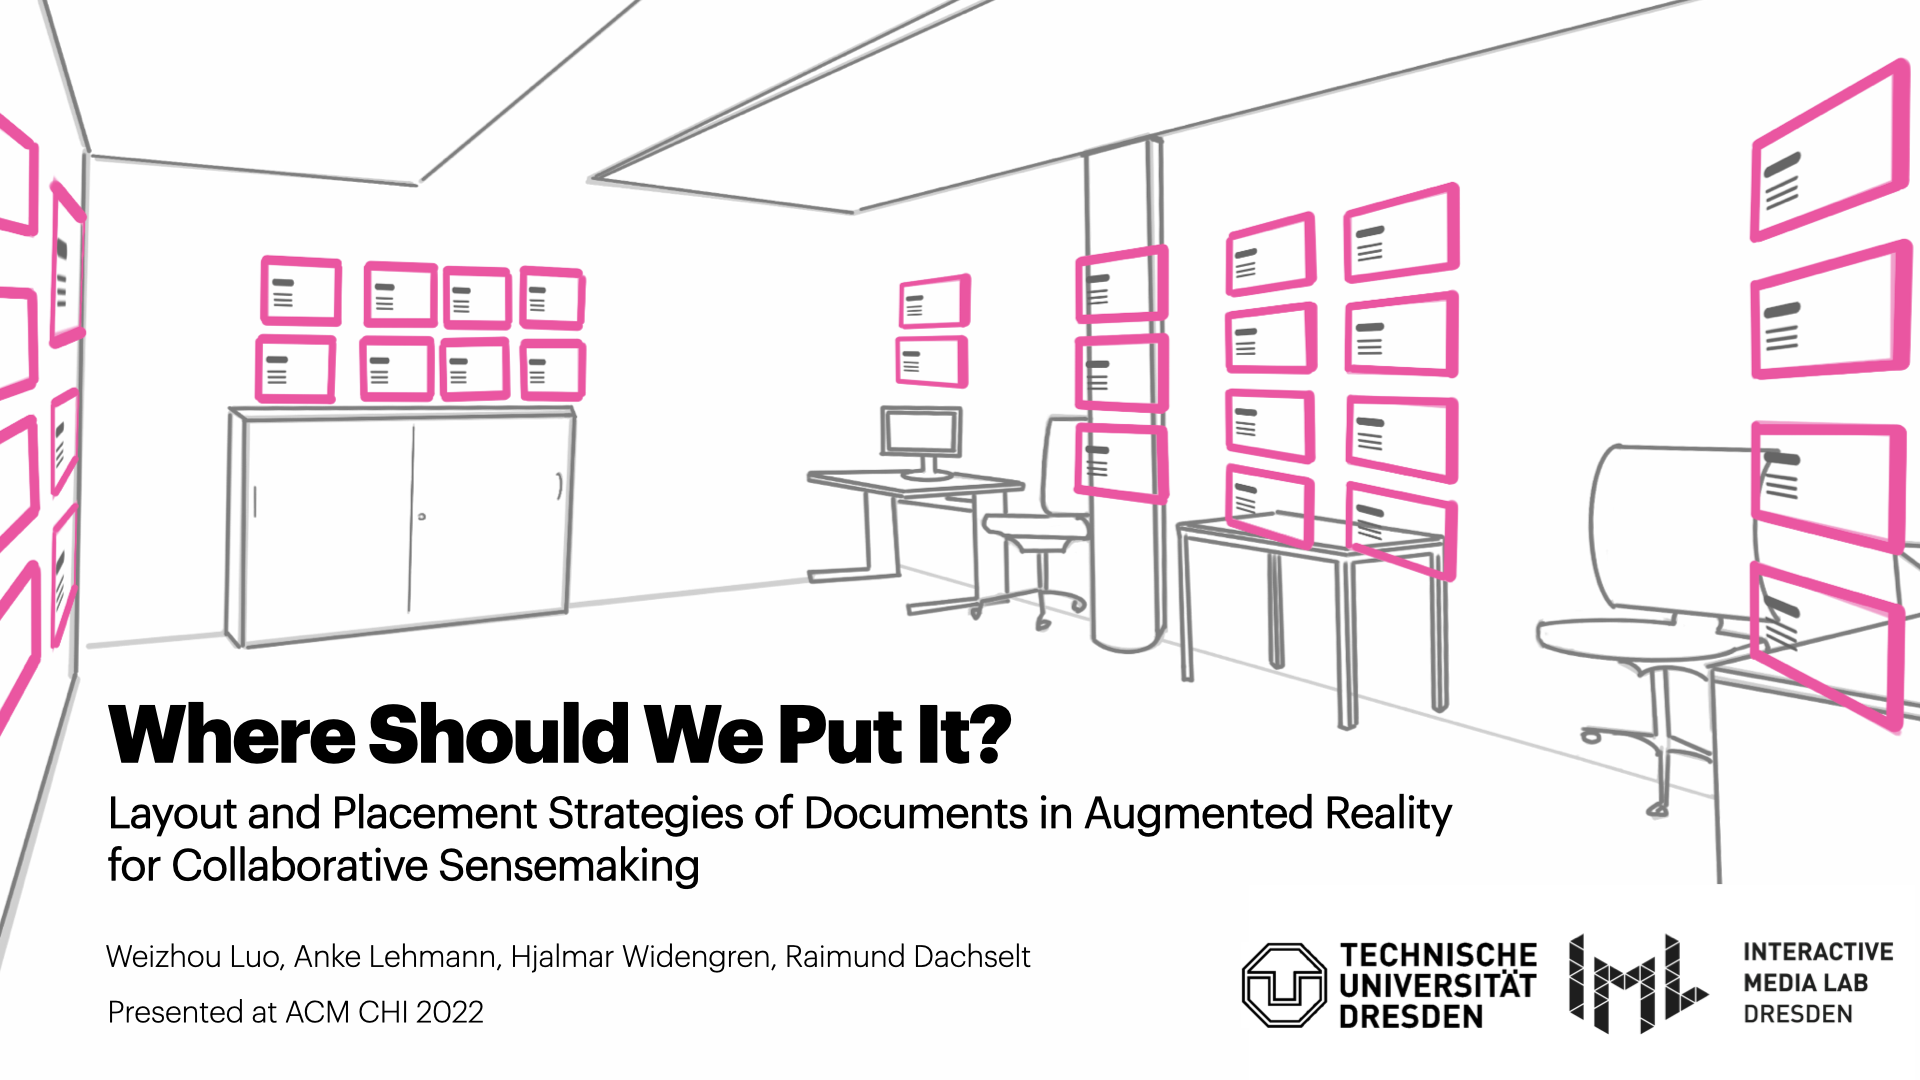 Full video of Document Layout and Placement Strategies in AR.